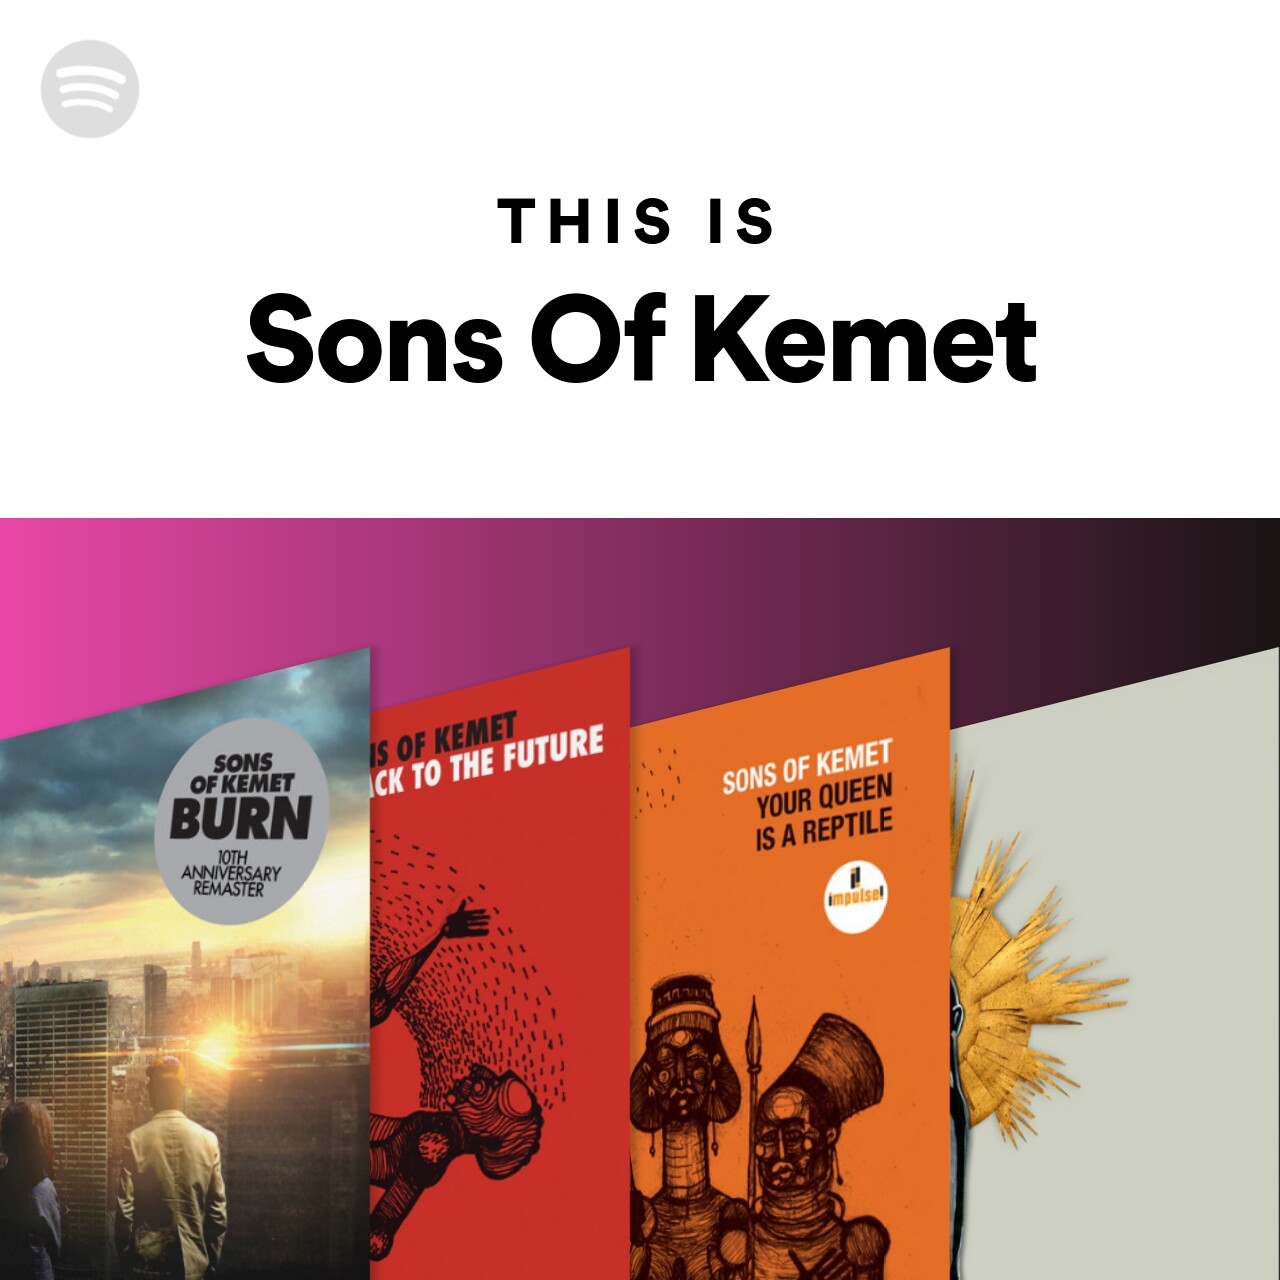 This Is Sons Of Kemet